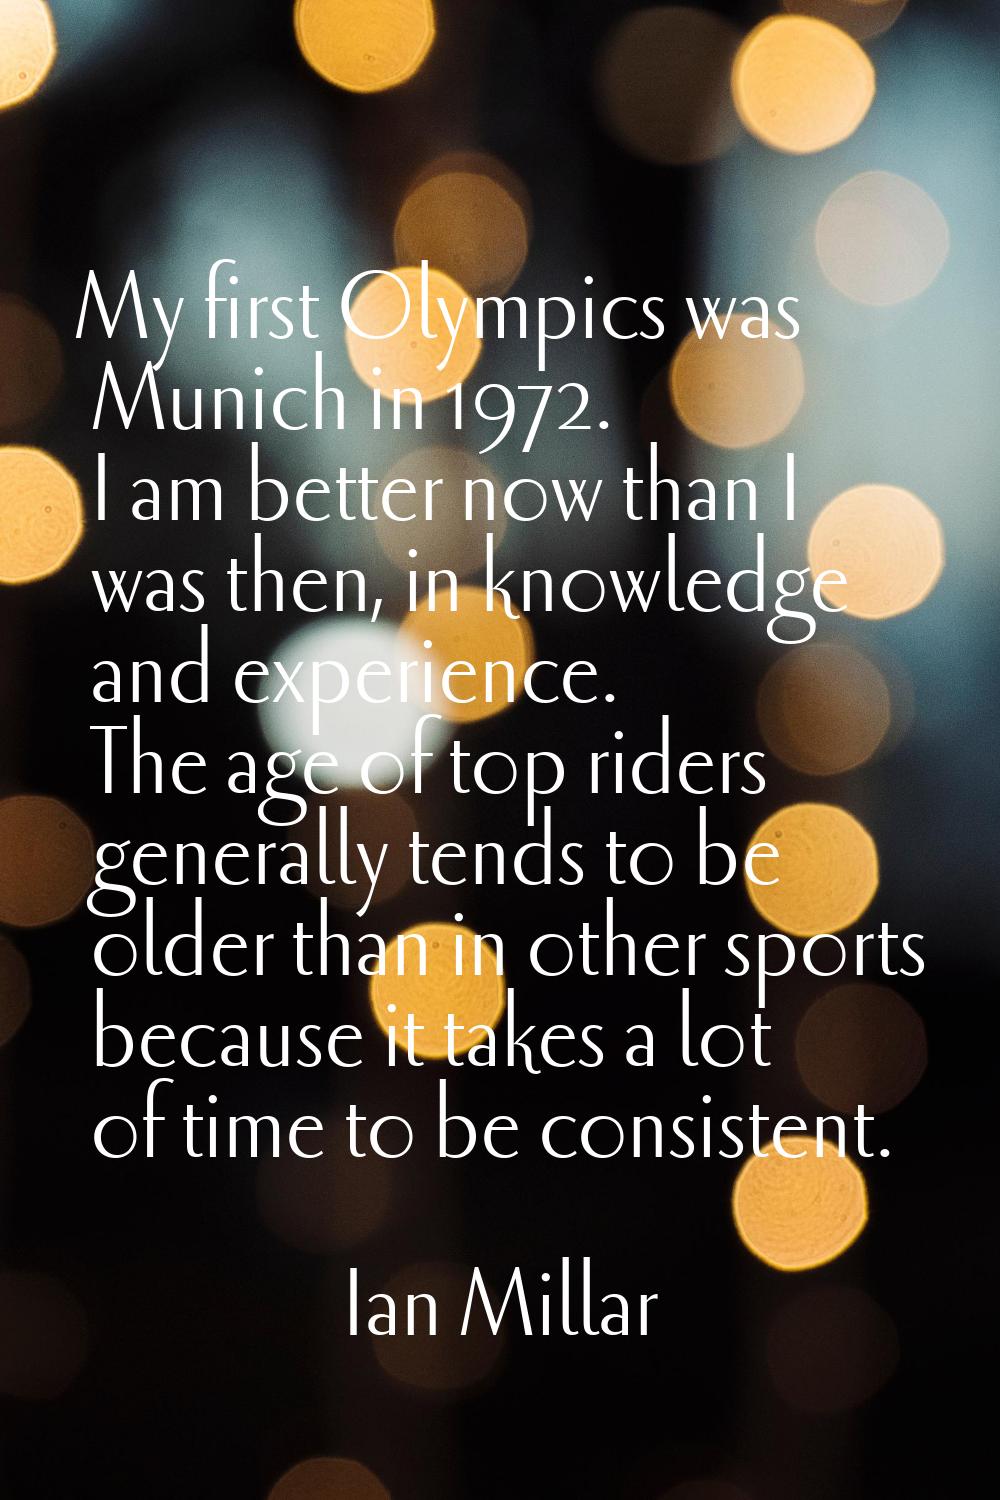 My first Olympics was Munich in 1972. I am better now than I was then, in knowledge and experience.